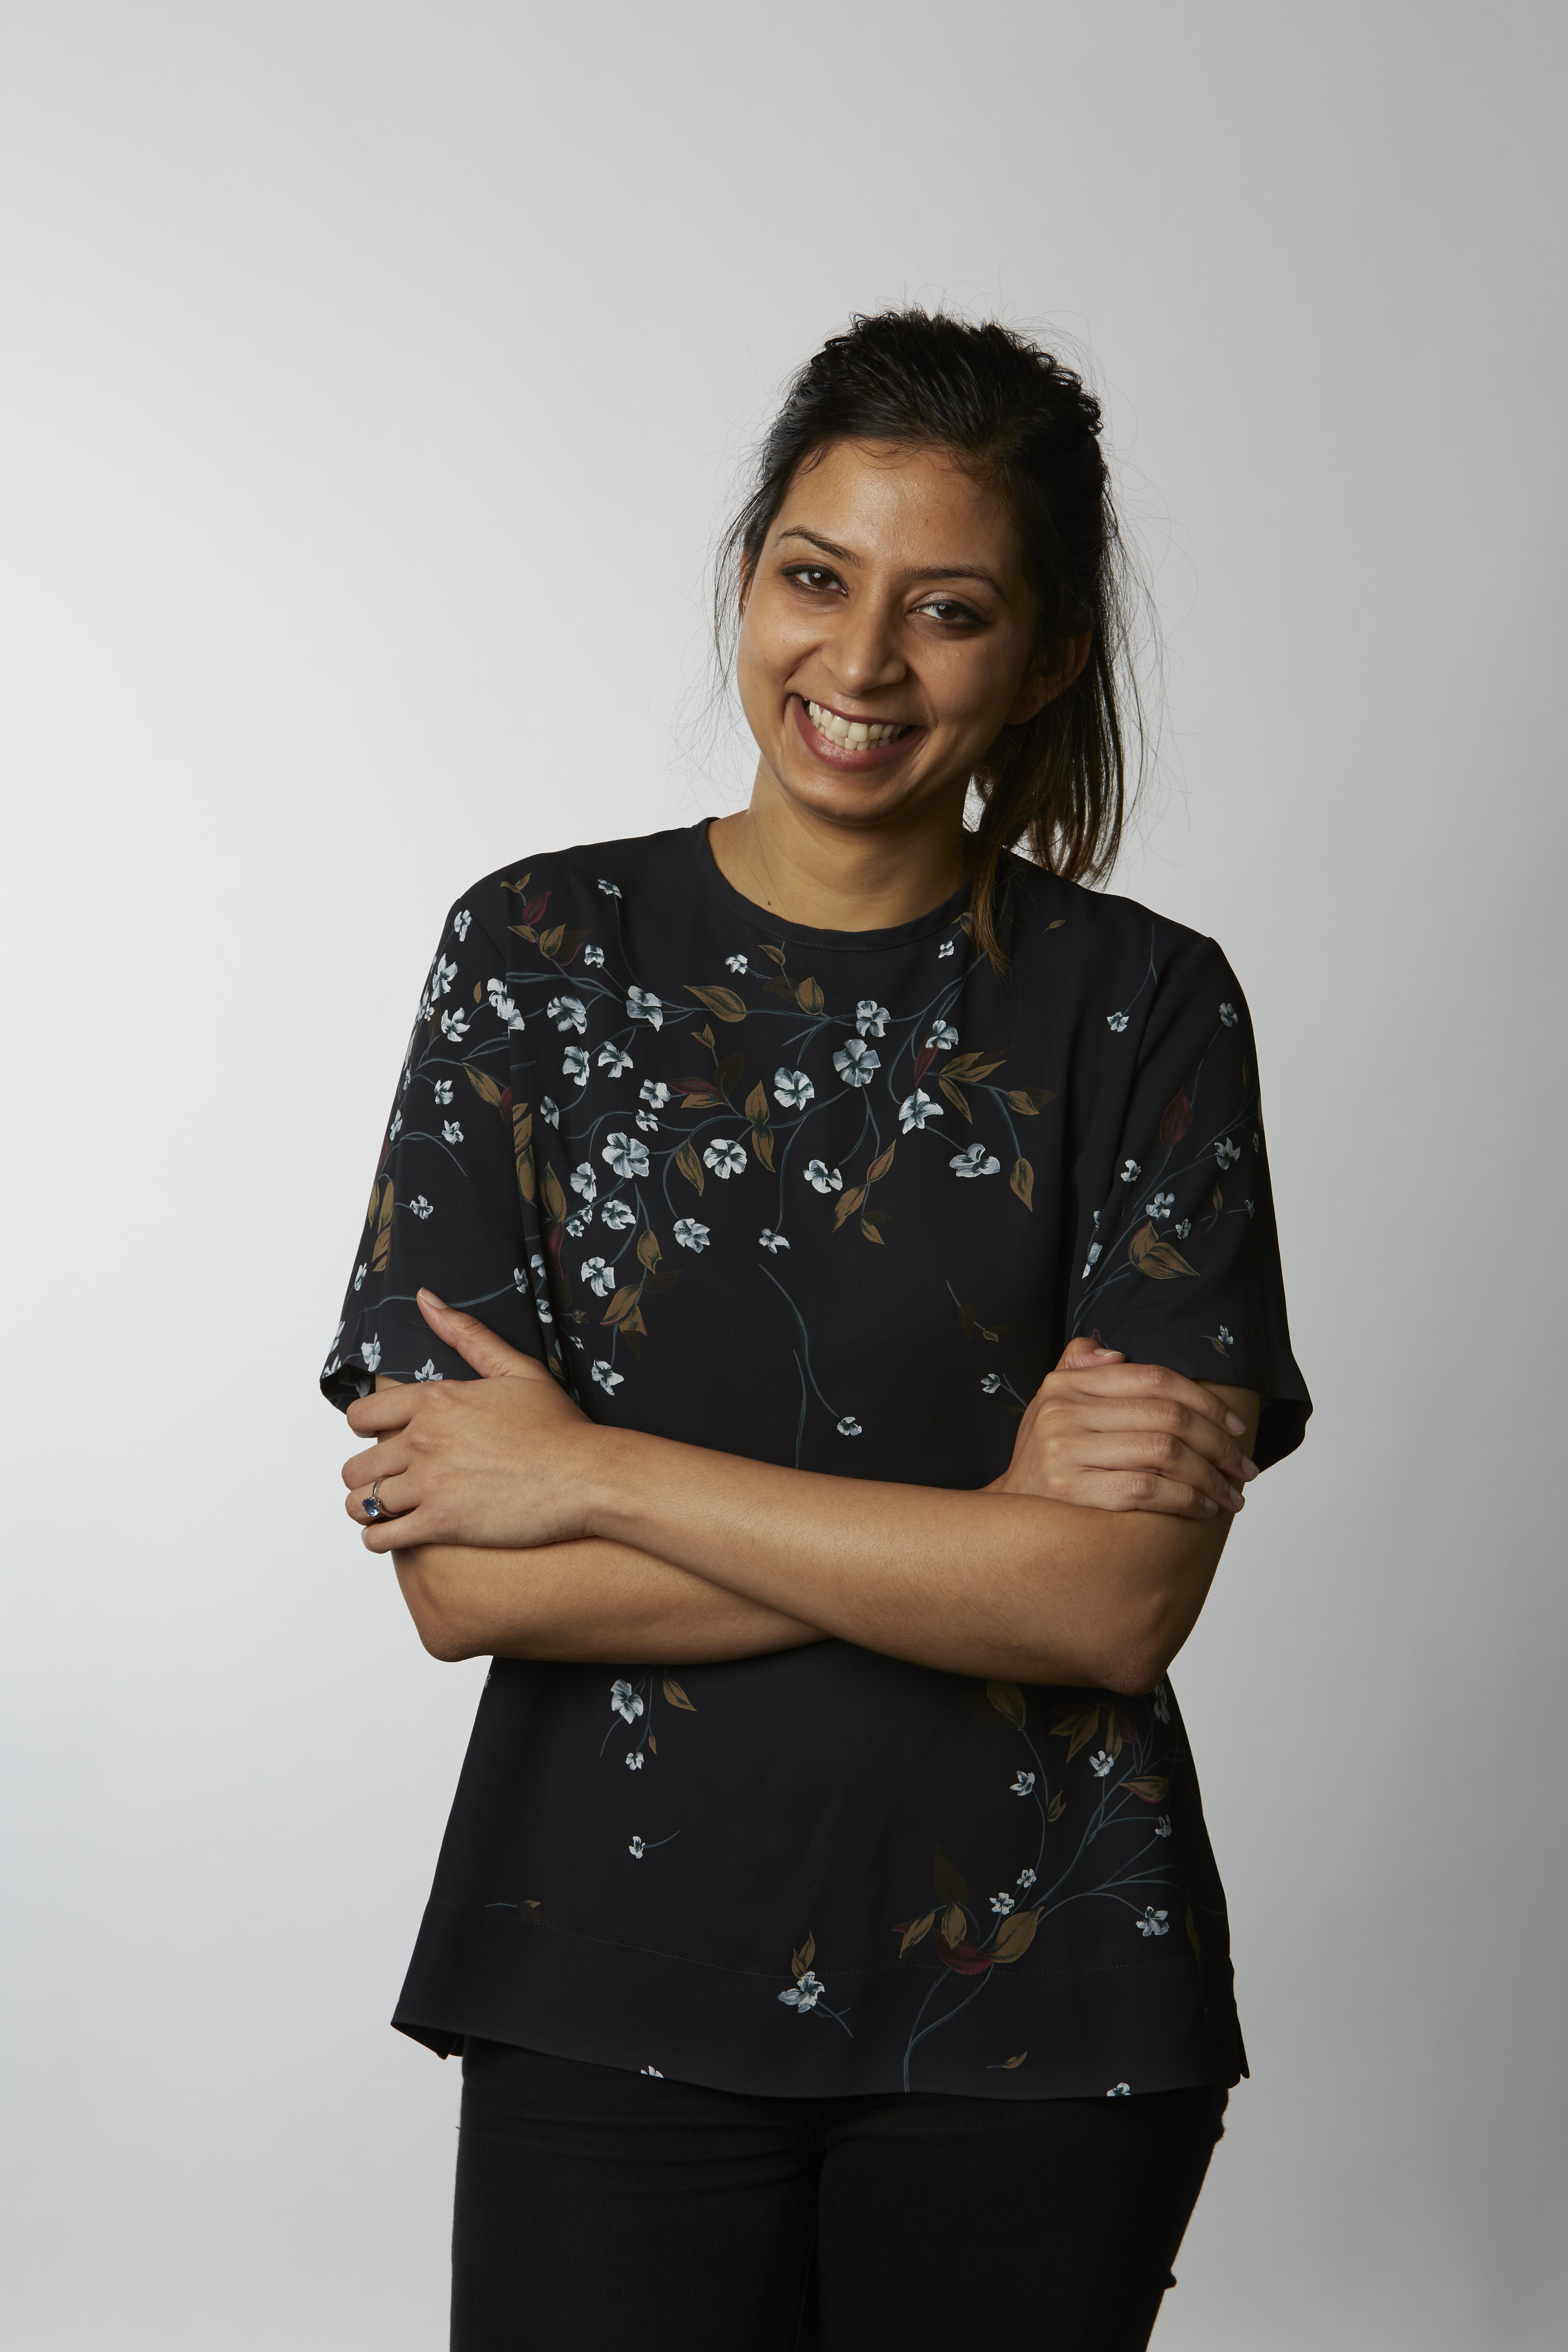 Divya Purushotham appointed Co-Chair of Architecture + Women New Zealand